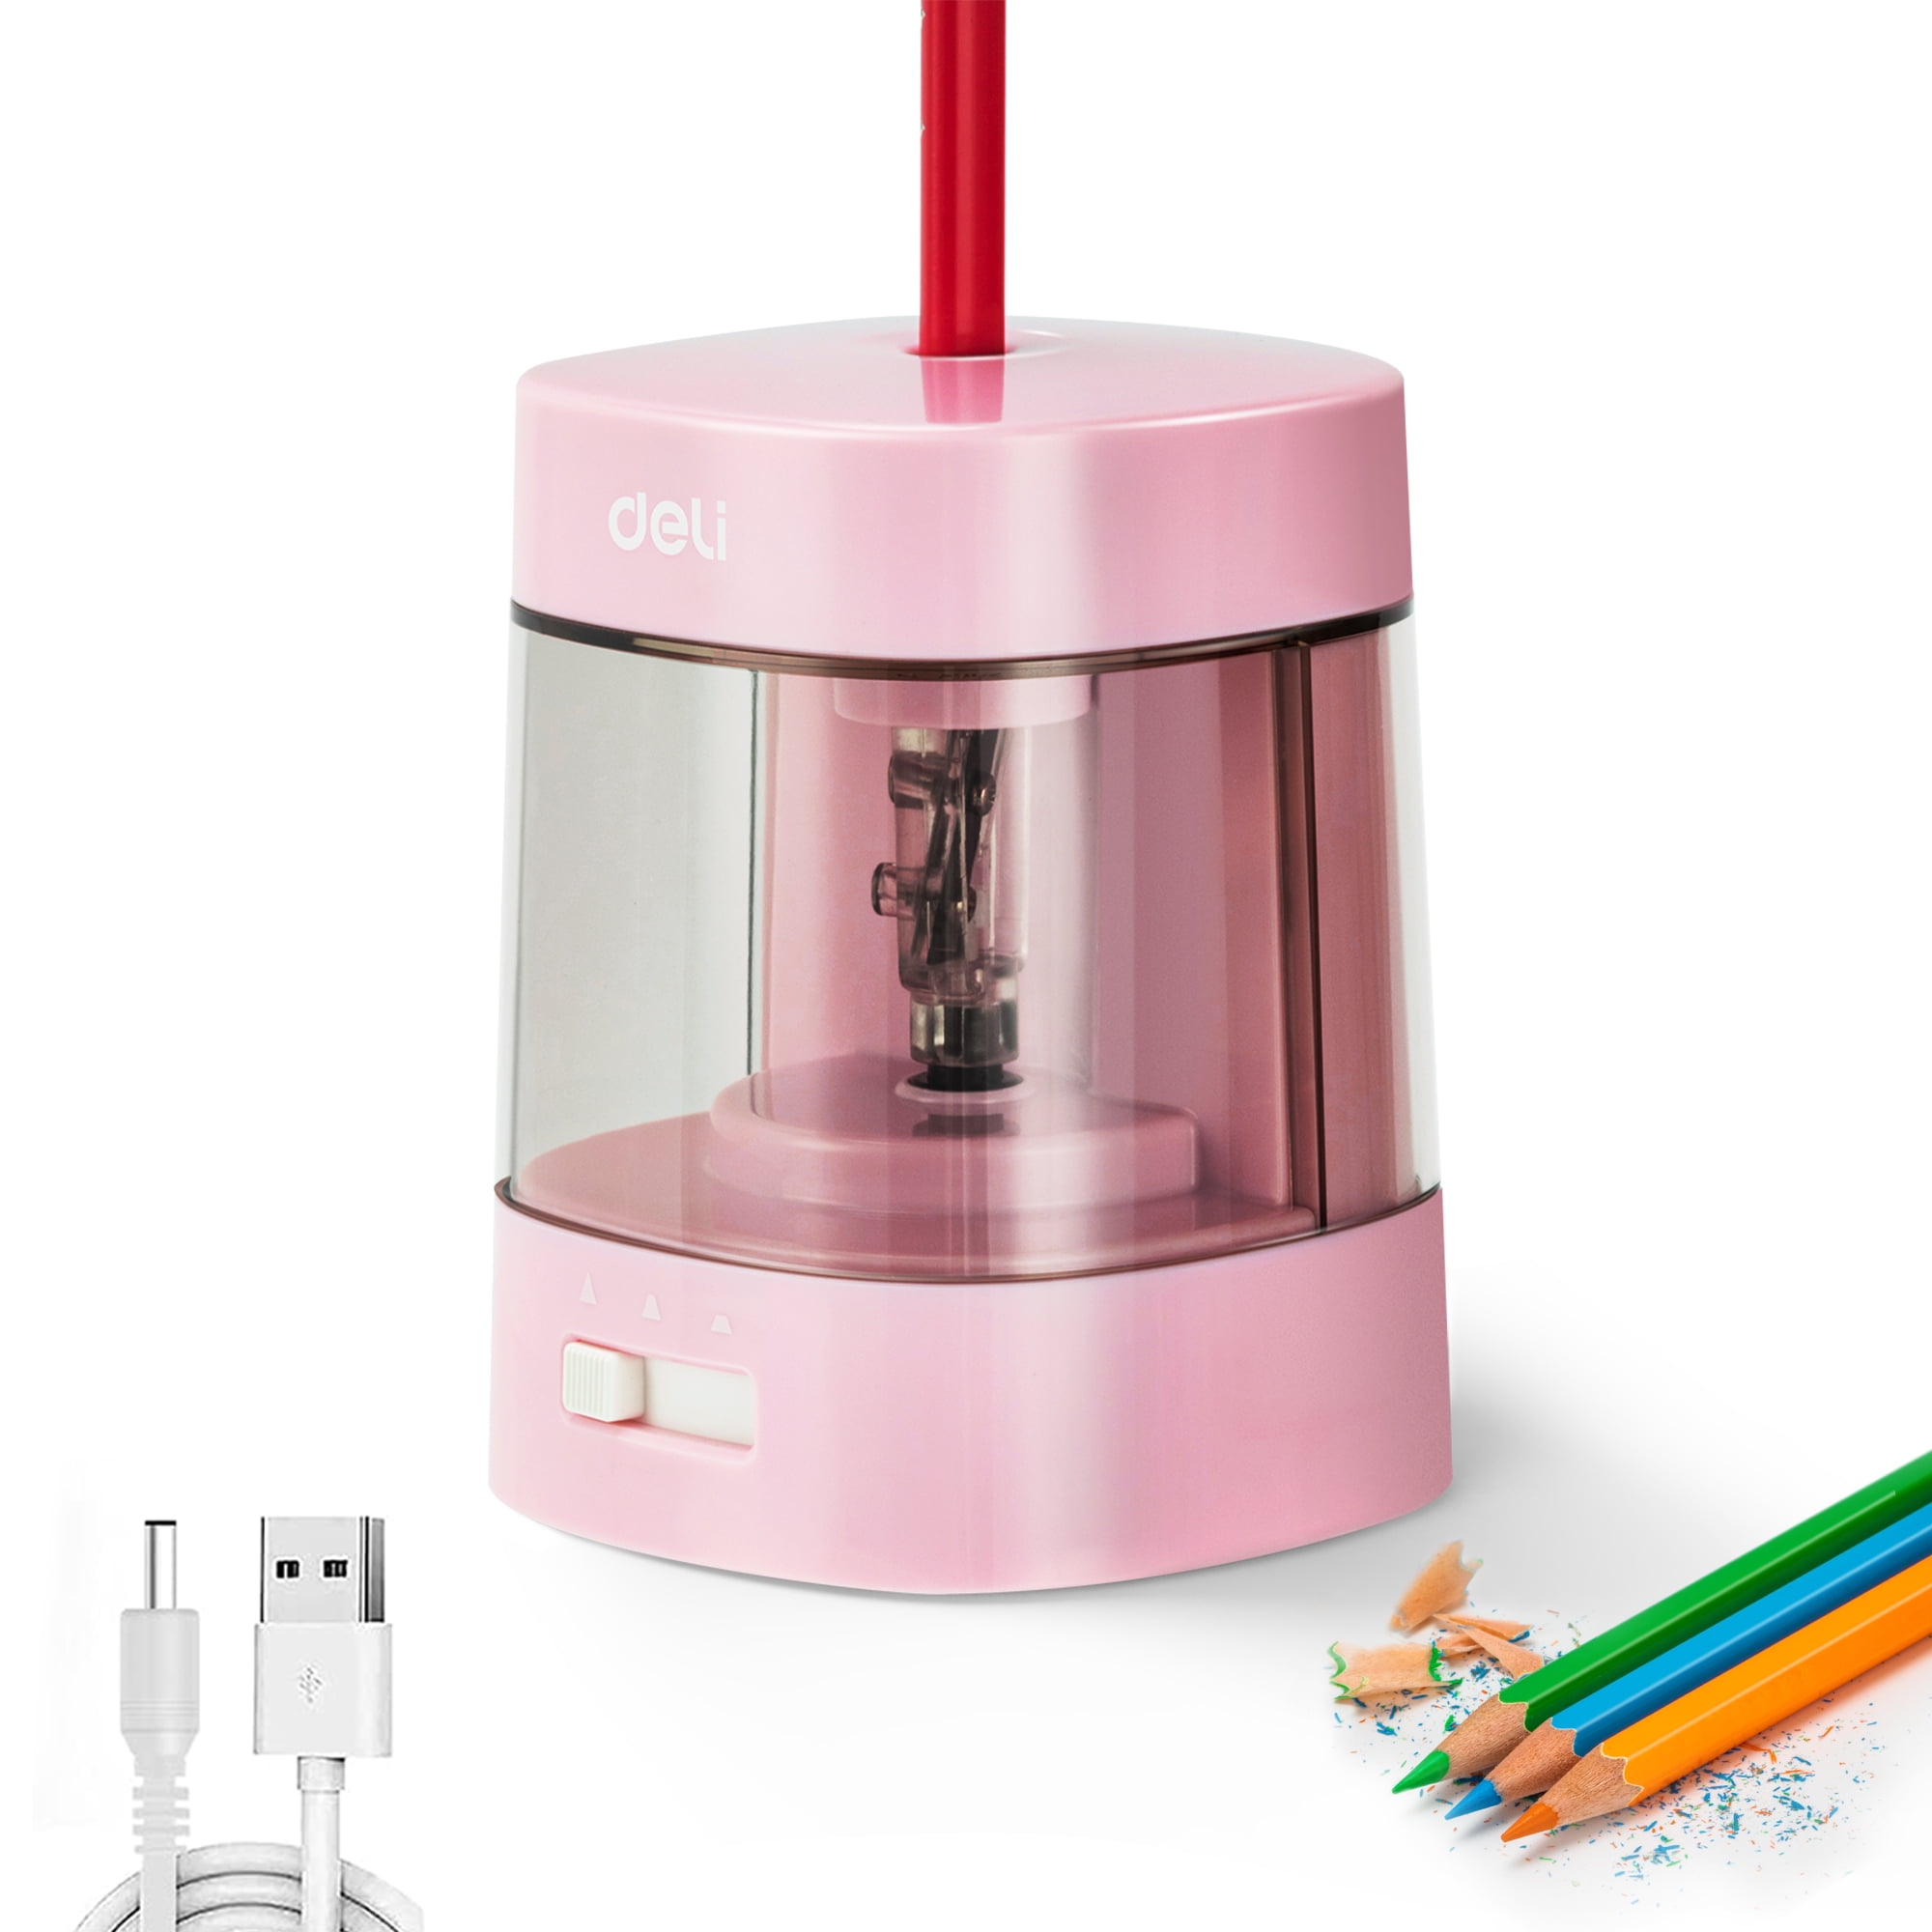 Deli Electric Pencil Sharpener,Suitable for No.2 Pencils Colored Pencils, USB & Battery Operated, -